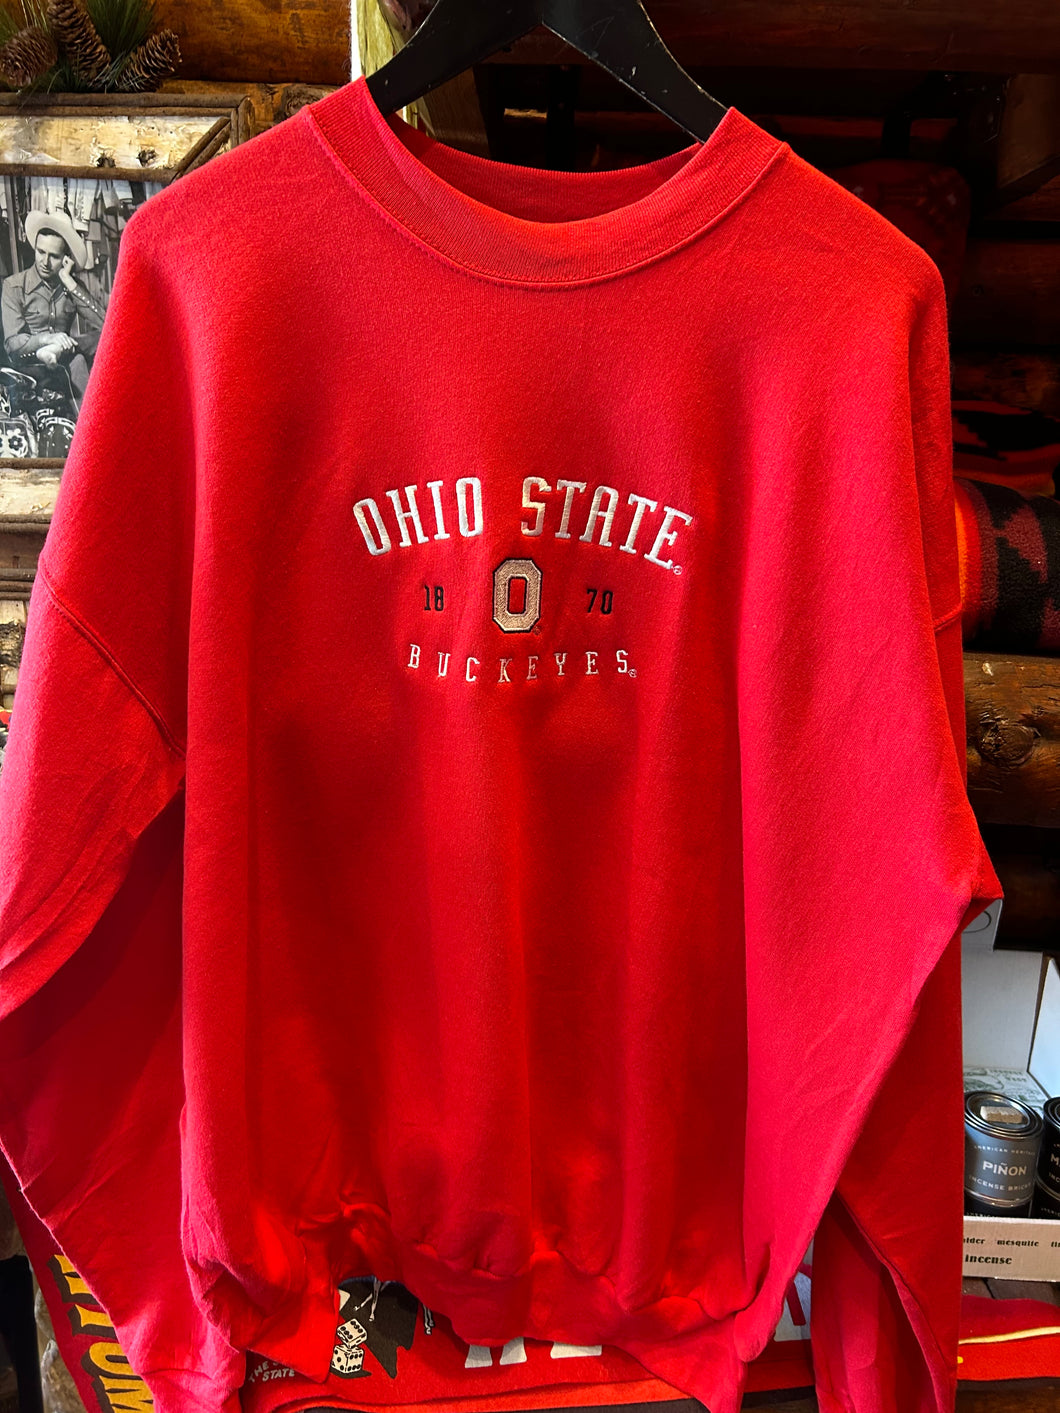 Vintage Ohio State 1870 Embroidered Sweater, XL